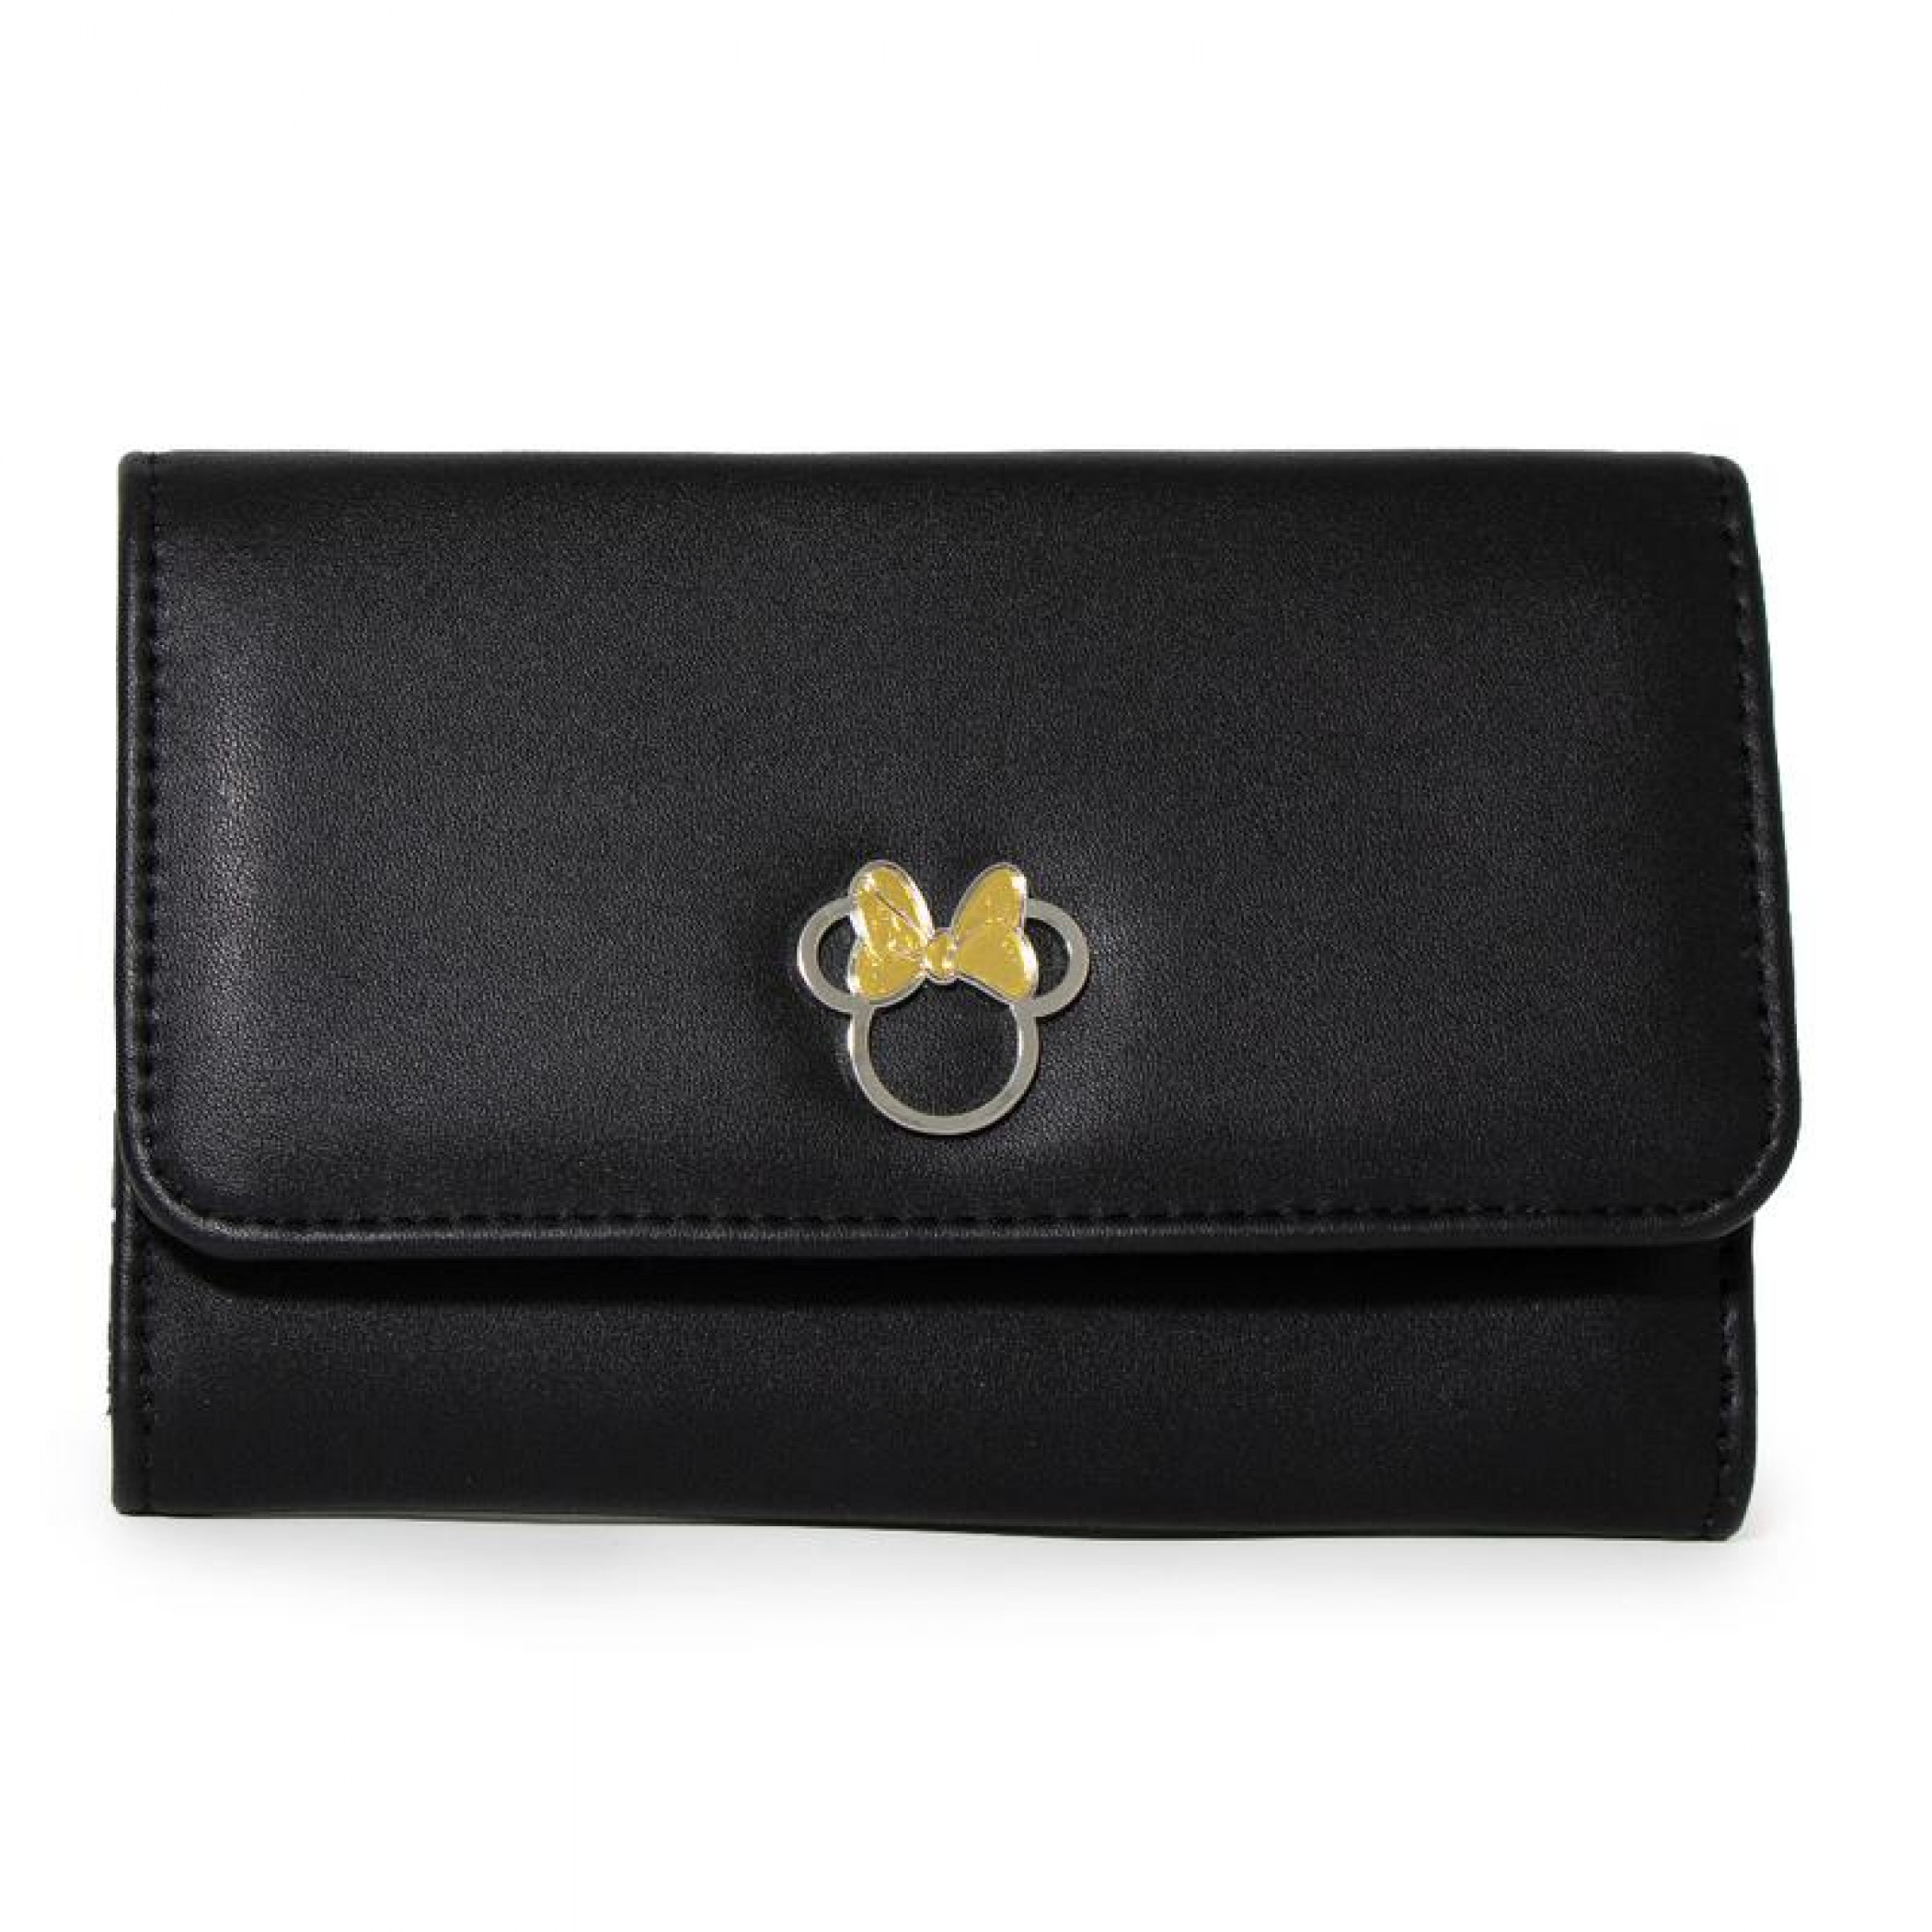 Disney Minnie Mouse Ears with Gold Bow Fold Over Wallet